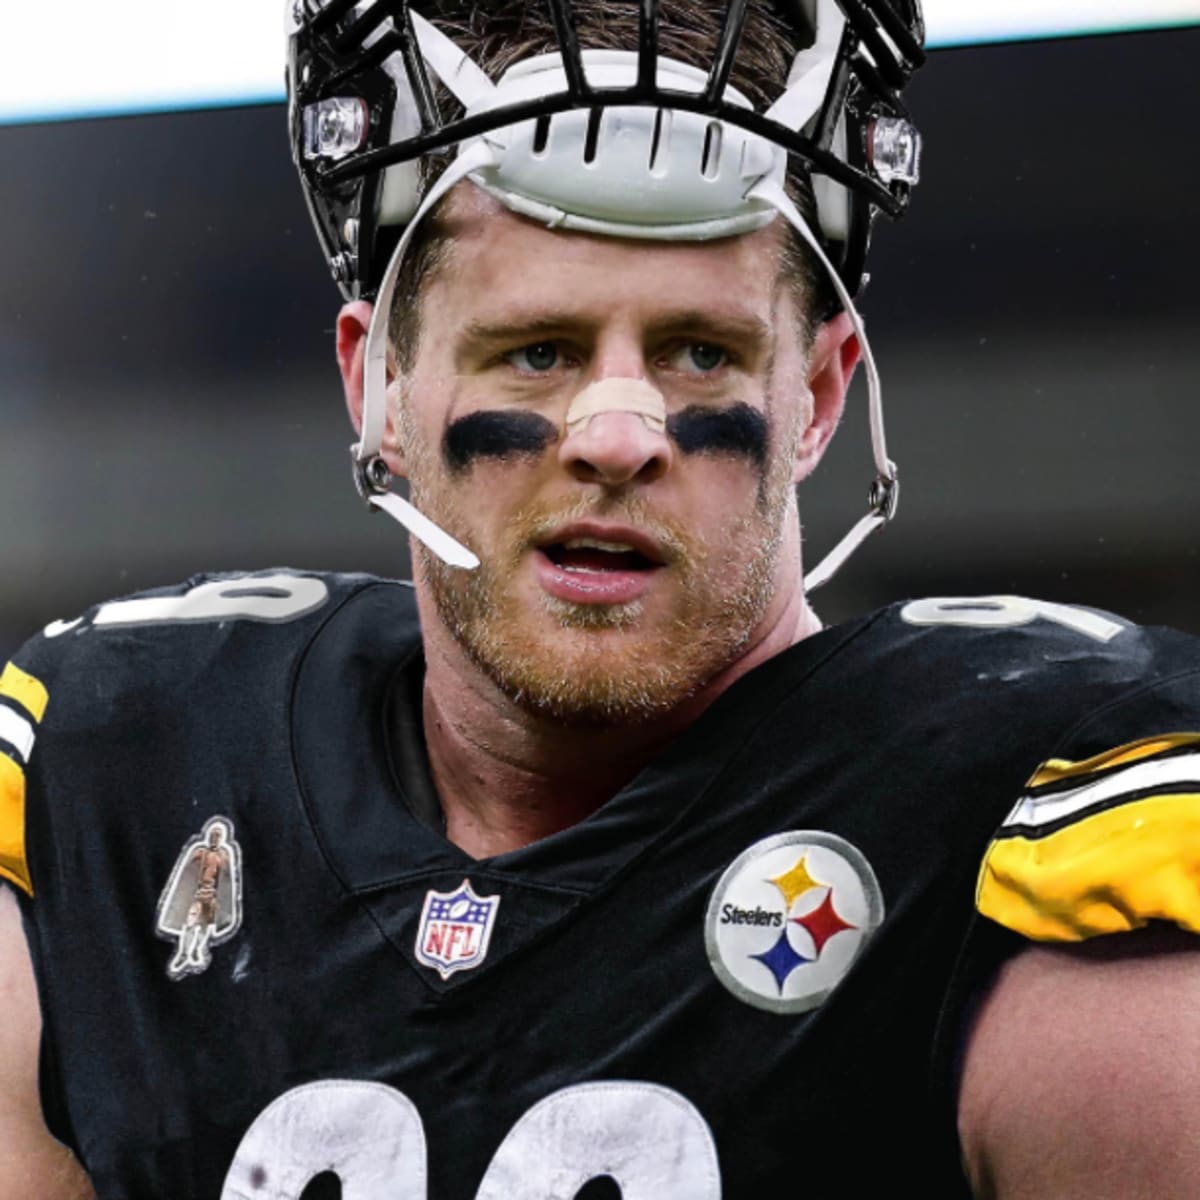 What happened to J.J. Watt? Why NFL star left Texans, signed with